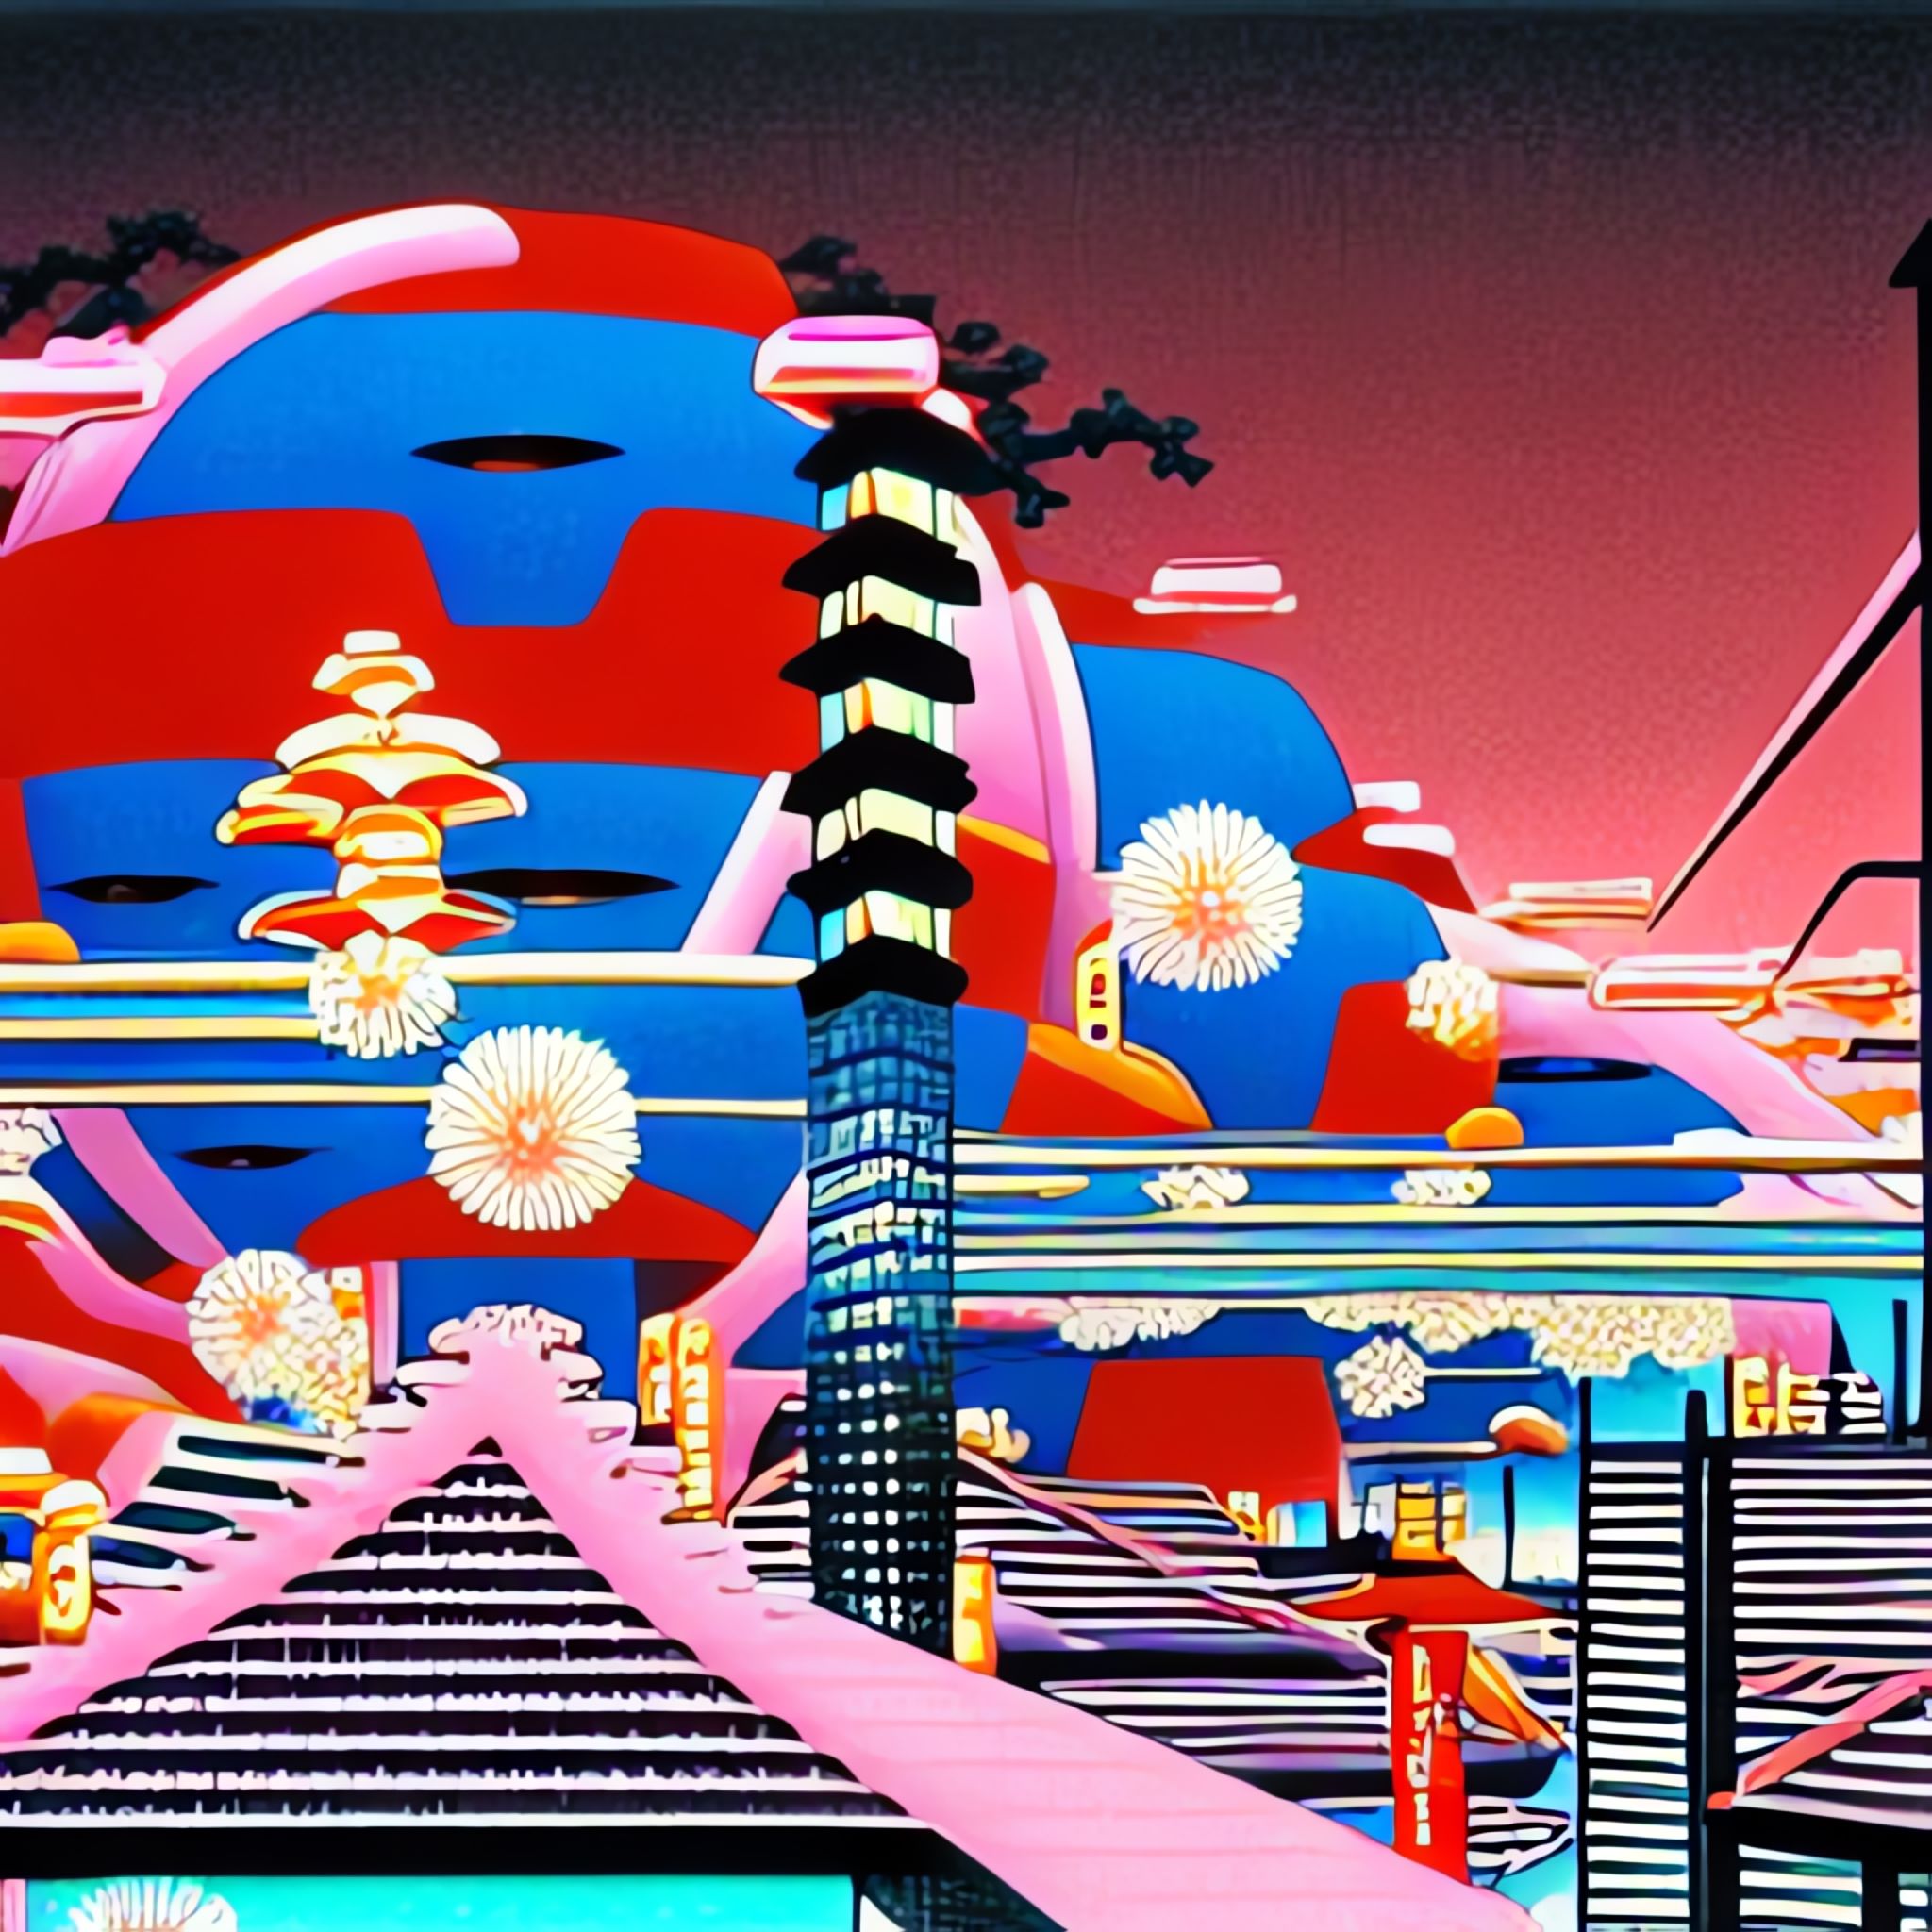 Geisha-in-the-middle-of-the-frame-Neo-Tokyo-lots-of-details-Shusei-Nagaoko-0wp2